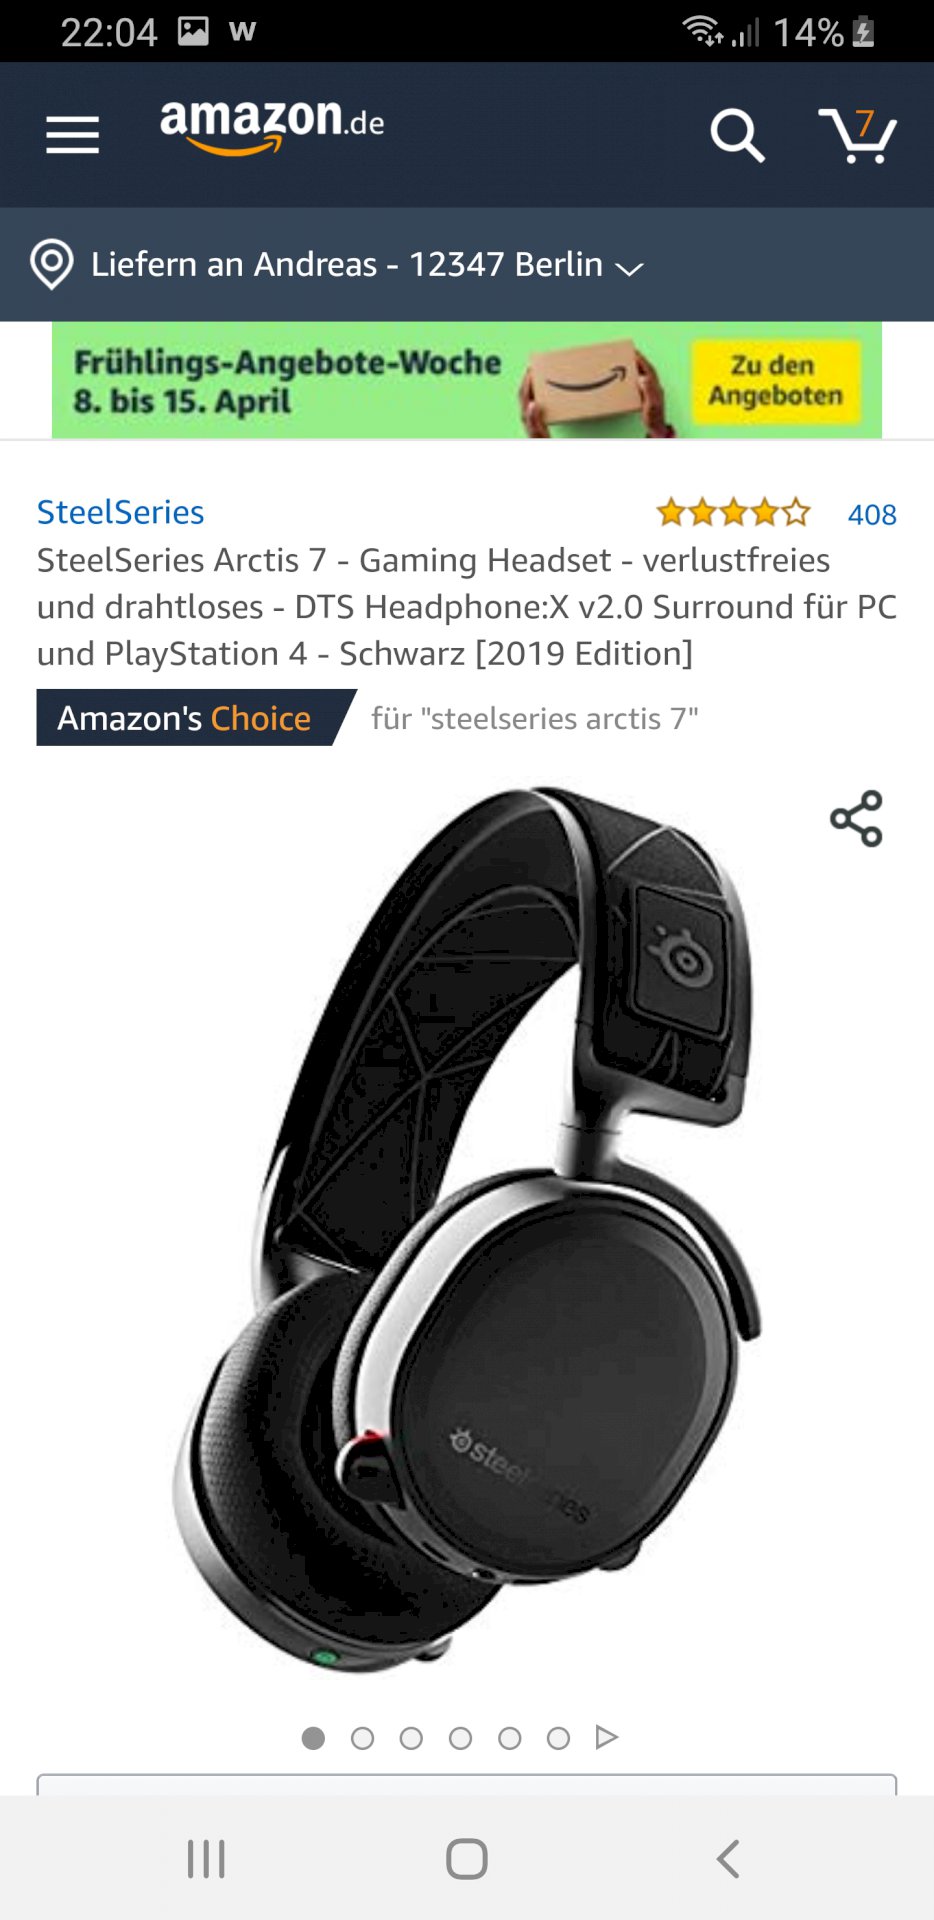 Ps4 Gaming Headset Turtle Beach, Steelseries or Logitech - 2